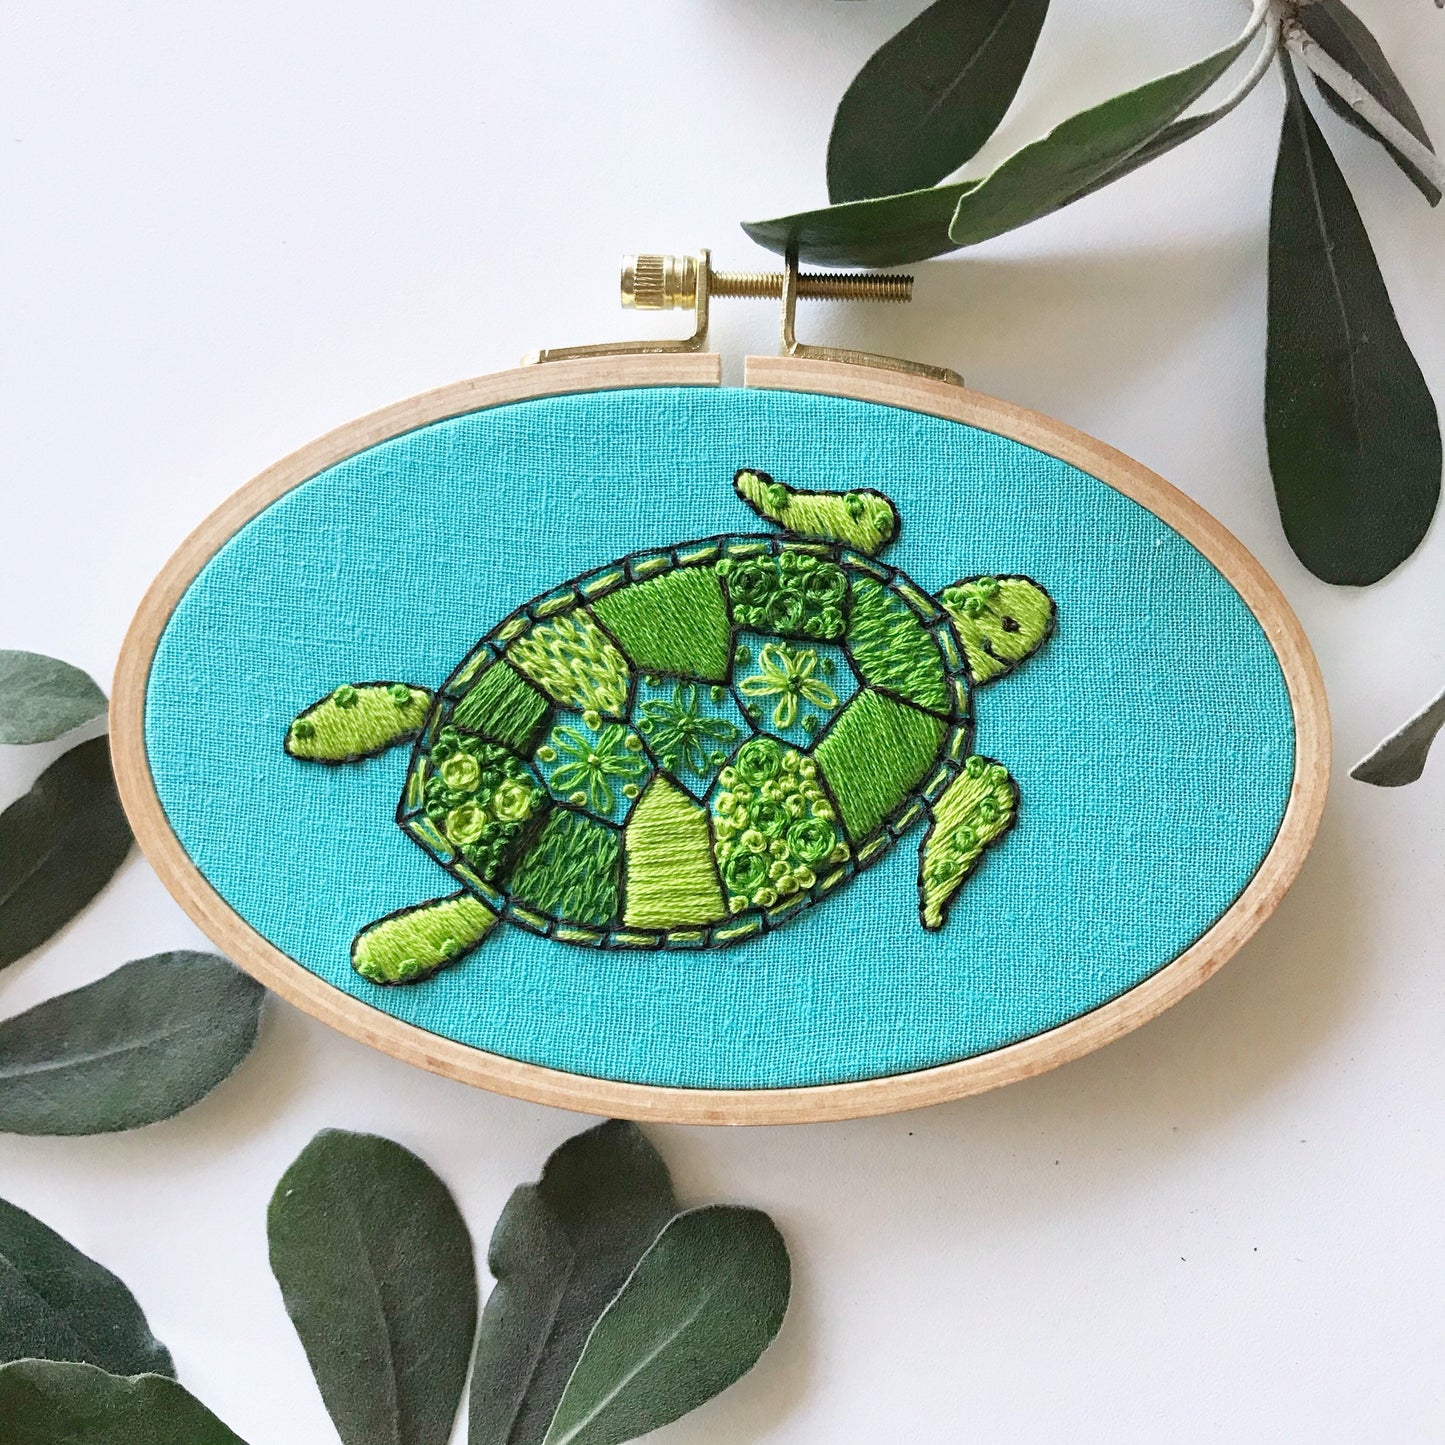 Green Sea Turtle: Design Your Own Embroidery Kit